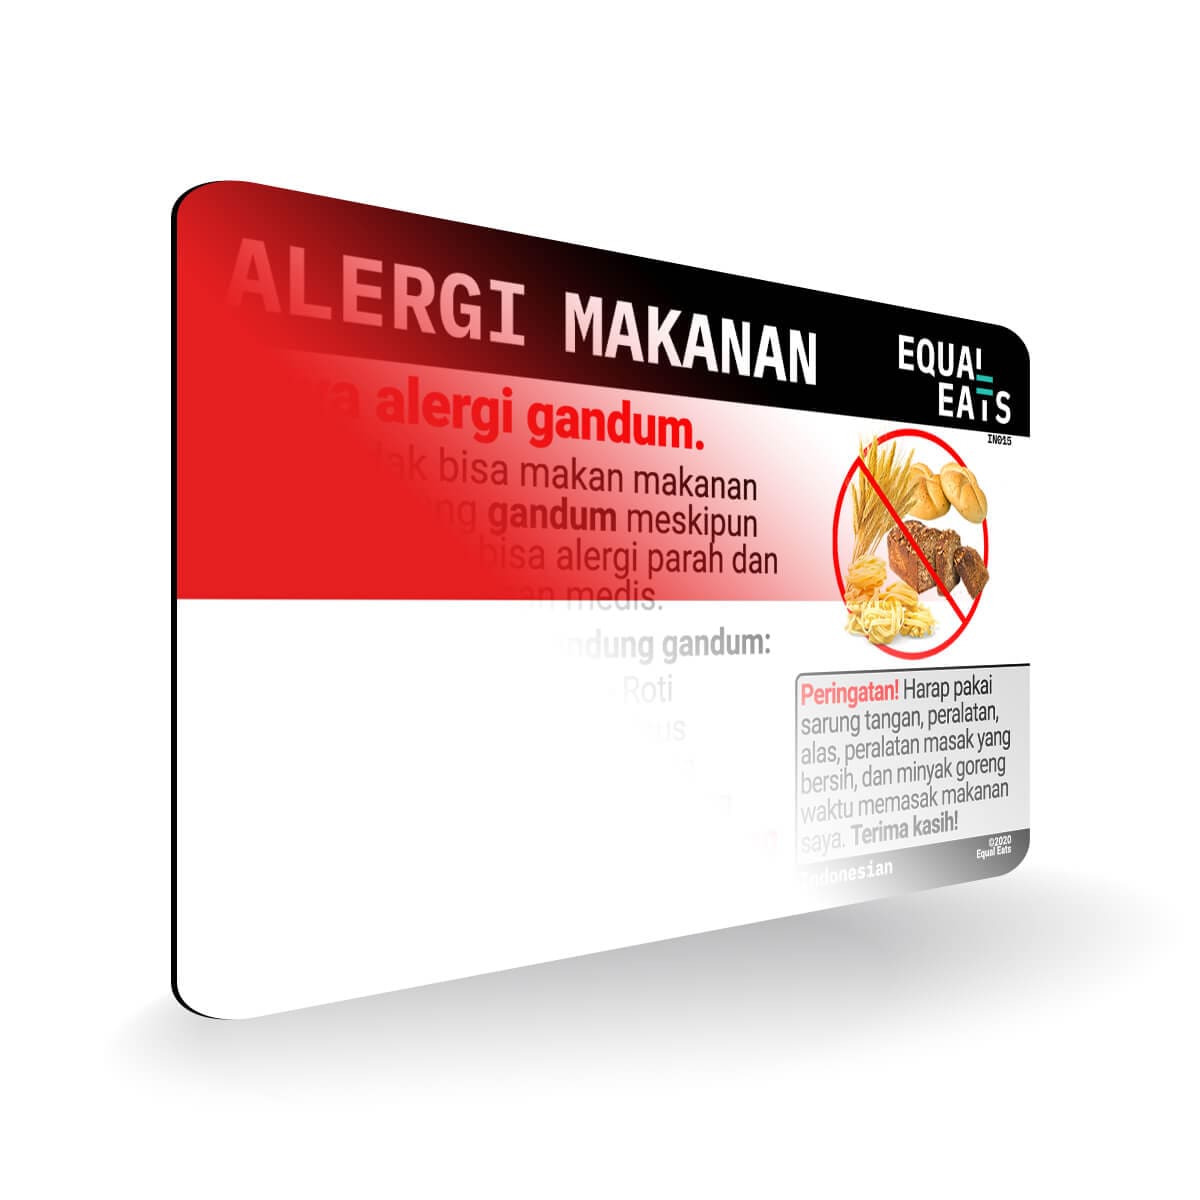 Wheat Allergy in Indonesian. Wheat Allergy Card for Indonesia